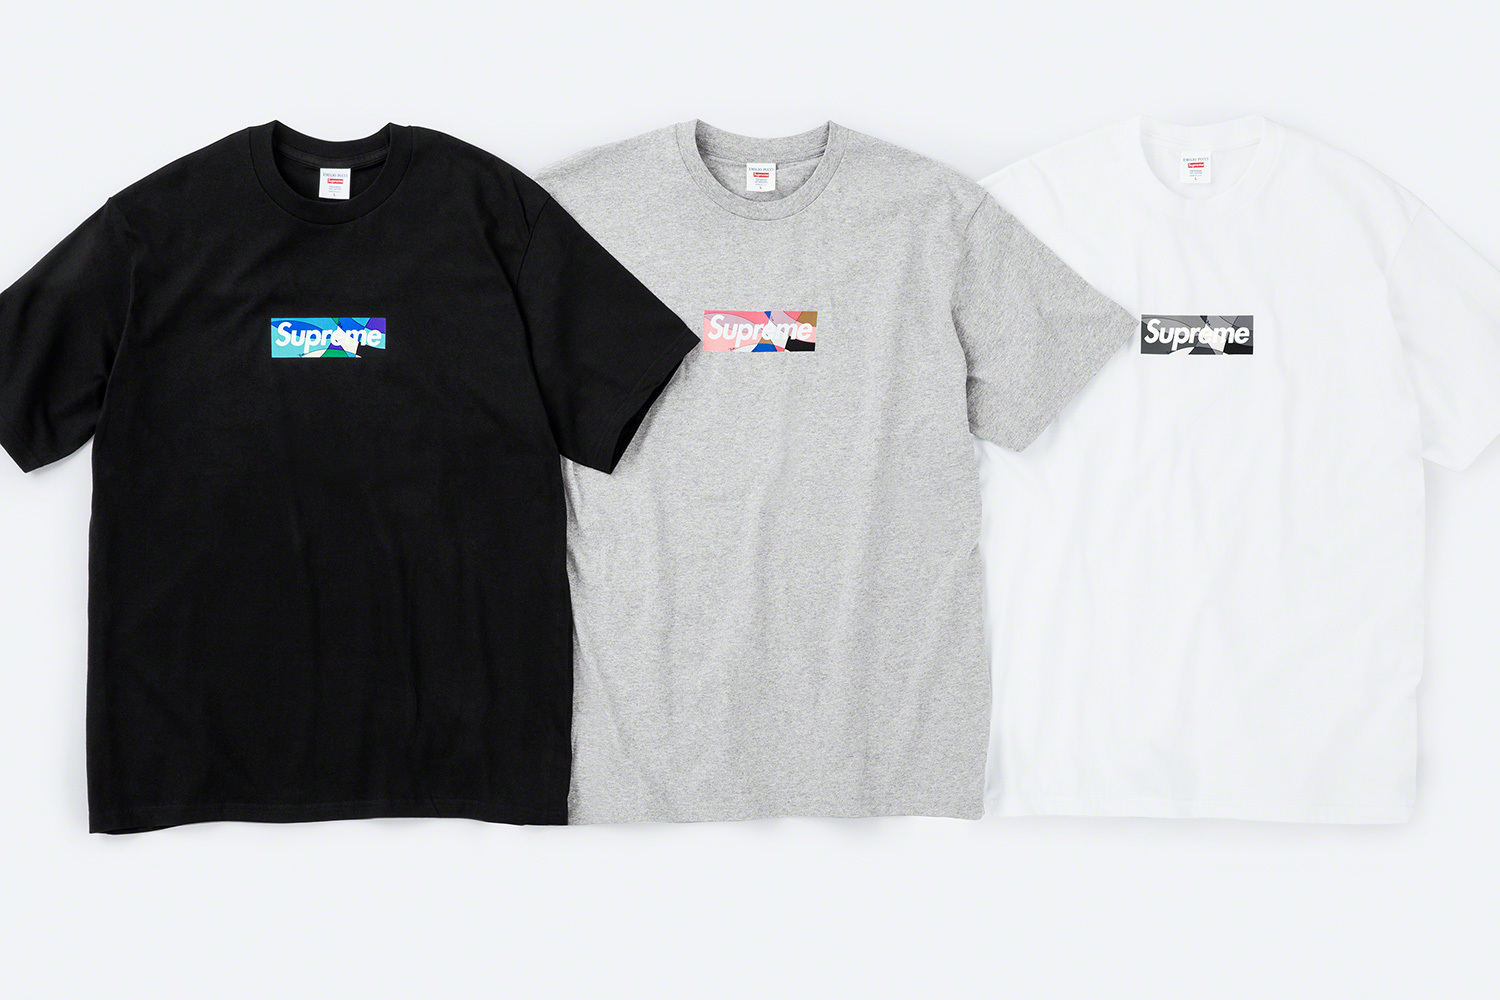 Supreme Reveal Full Pucci Collection Ft. Box Logo Tees - SLN Official